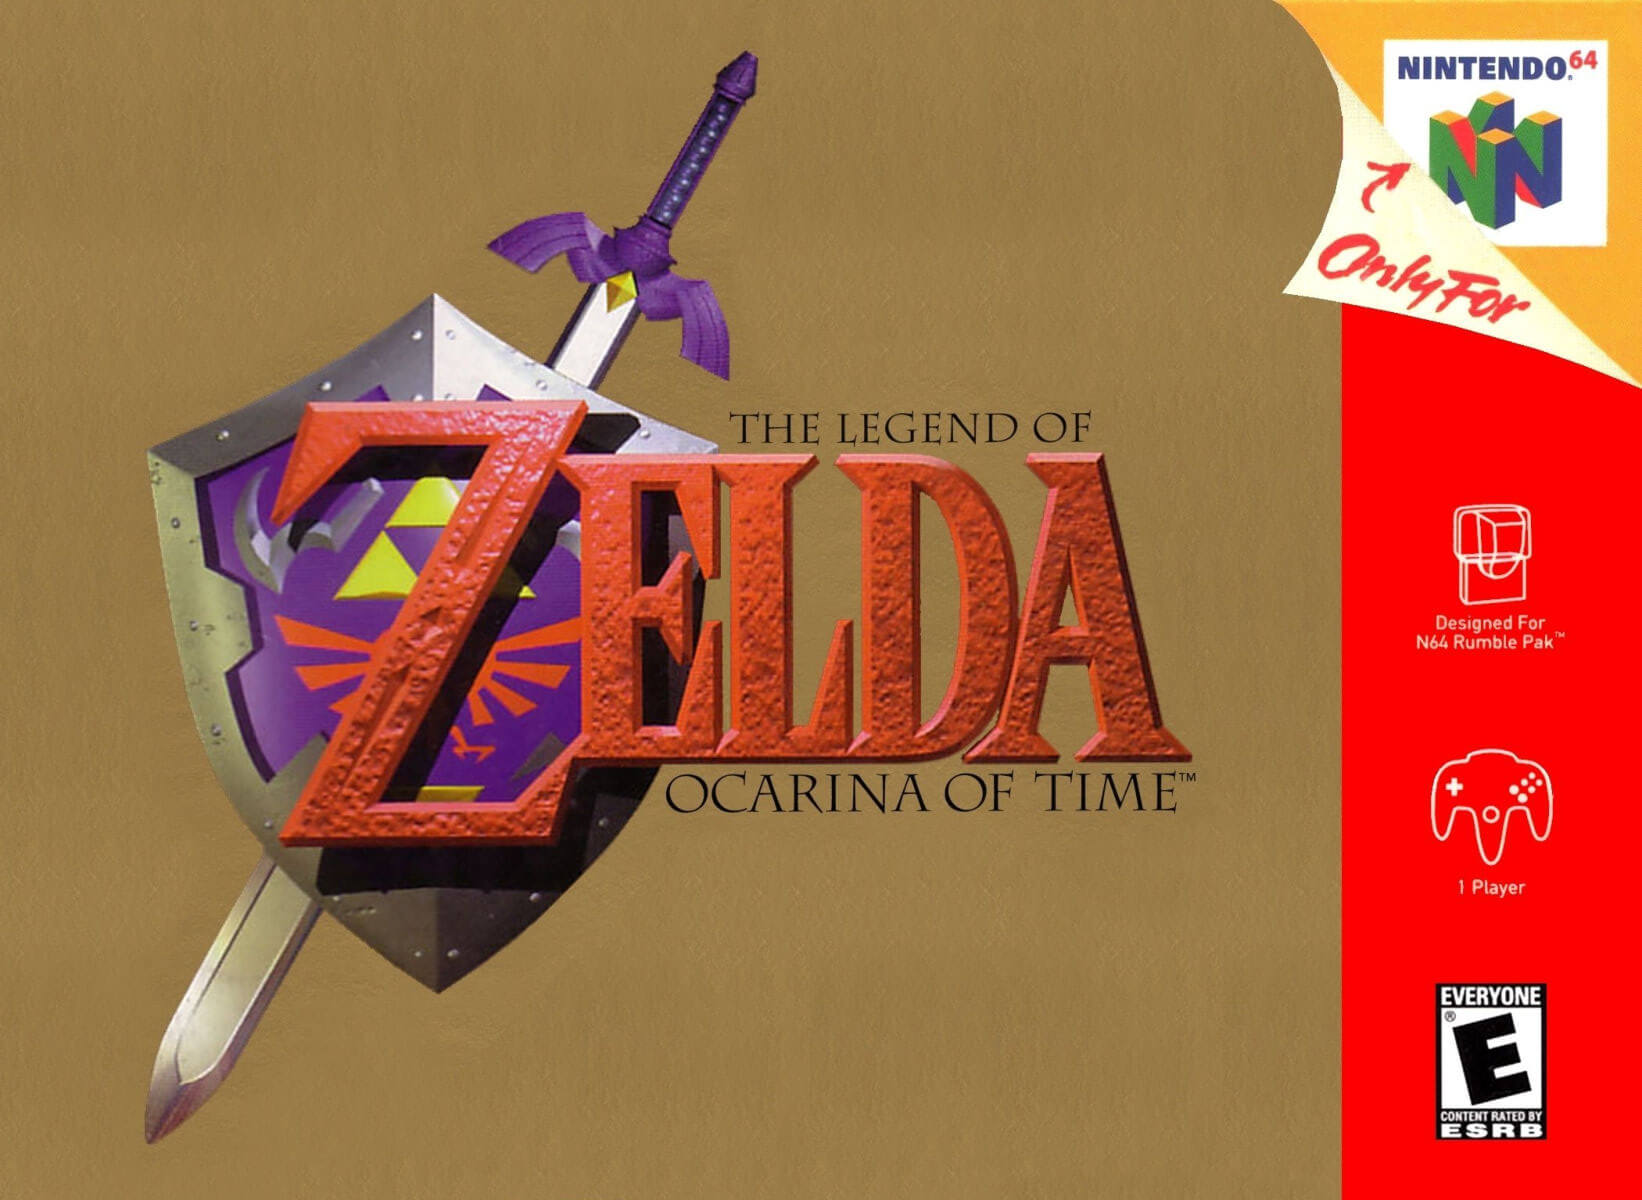 The Ocarina of Time Collection (Theme Songs From the Legend of Zelda) -  Album by Video Game Players - Apple Music